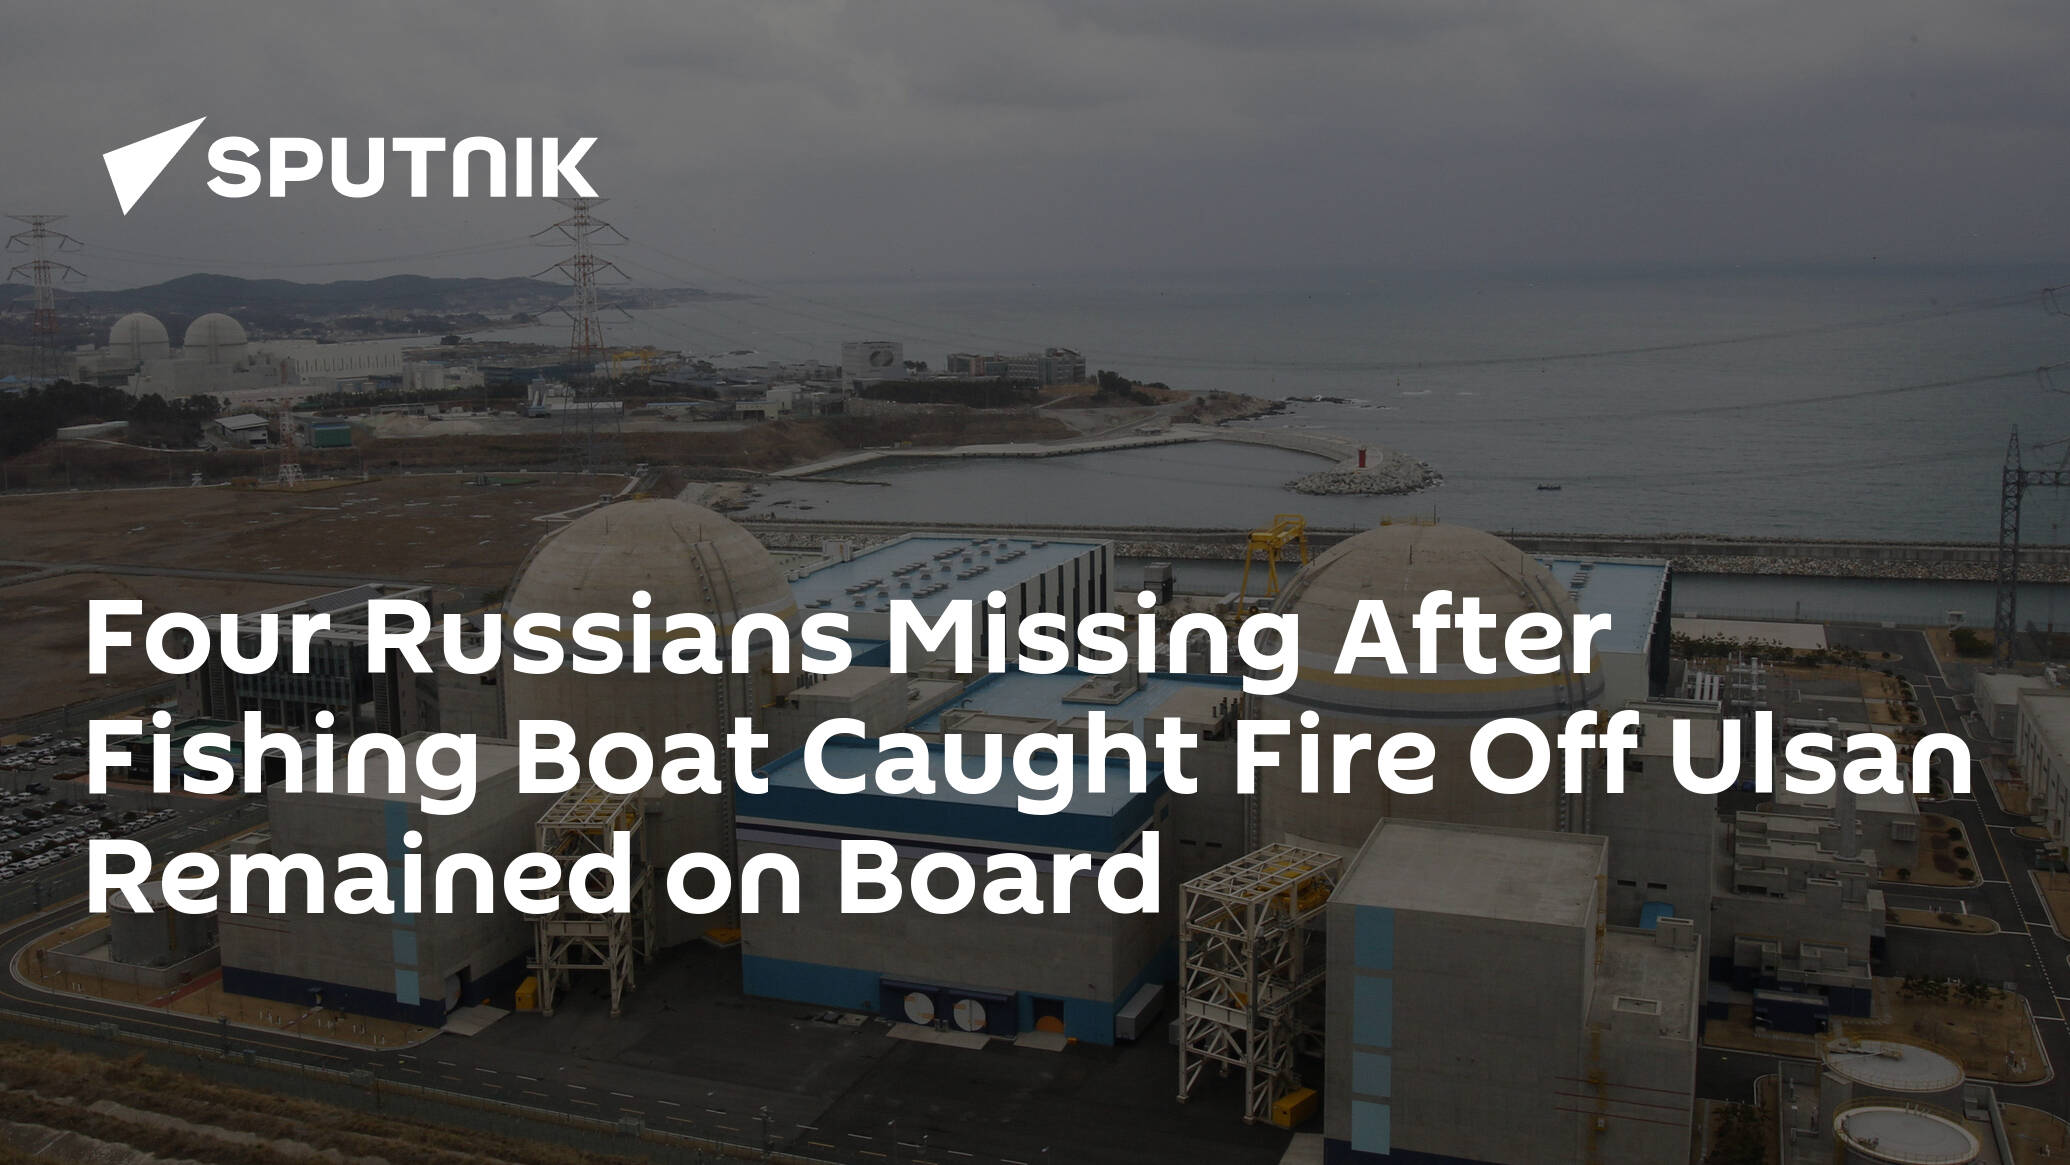 Four Russians Missing After Fishing Boat Caught Fire Off Ulsan Remained on Board